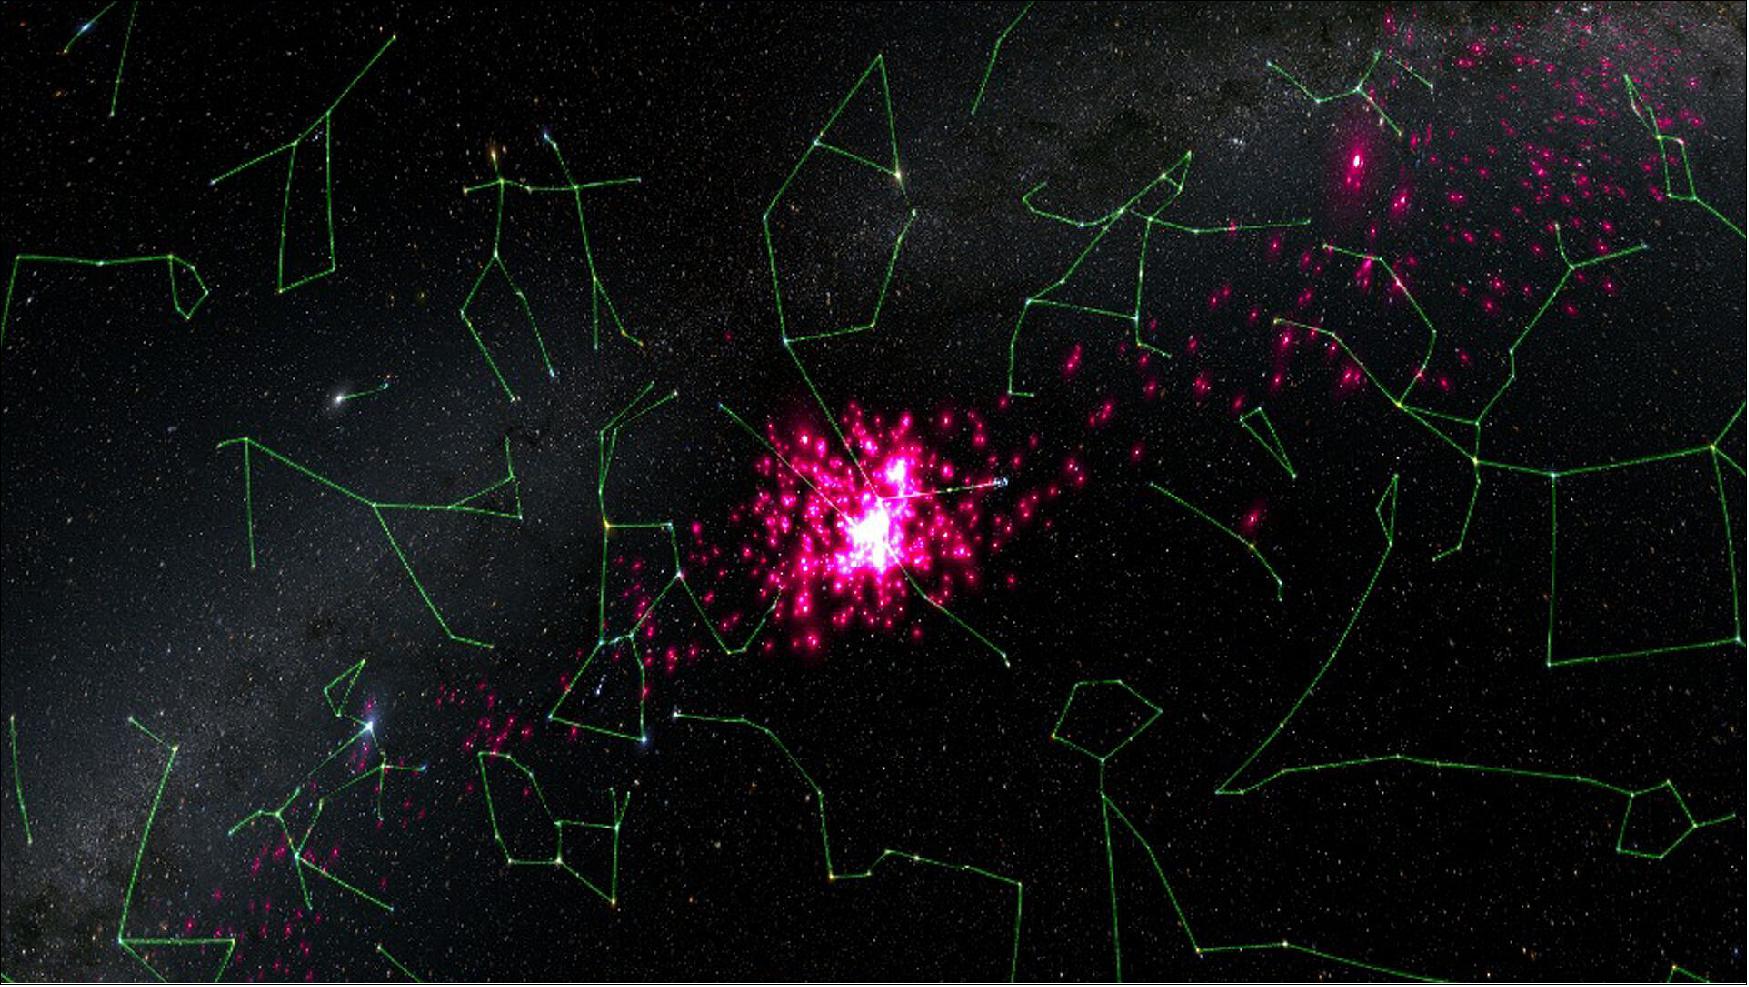 Figure 43: The Hyades star cluster is gradually merging with the background of stars in the Milky Way. The cluster is located 153 light years away and is visible to the unaided eye because the brightest members form a ‘V’-shape of stars in the constellation of Taurus, the Bull. This image shows members of the Hyades as identified in the Gaia data. Those stars are marked in pink, and the shapes of the various constellations are traced in green. Stars from the Hyades can be seen stretching out from the central cluster to form two ‘tails’. These tails are known as tidal tails and it is through these that stars leave the cluster. The image was created using Gaia Sky (image credit: ESA/Gaia/DPAC, CC BY-SA 3.0 IGO; acknowledgement: S. Jordan/T. Sagrista)